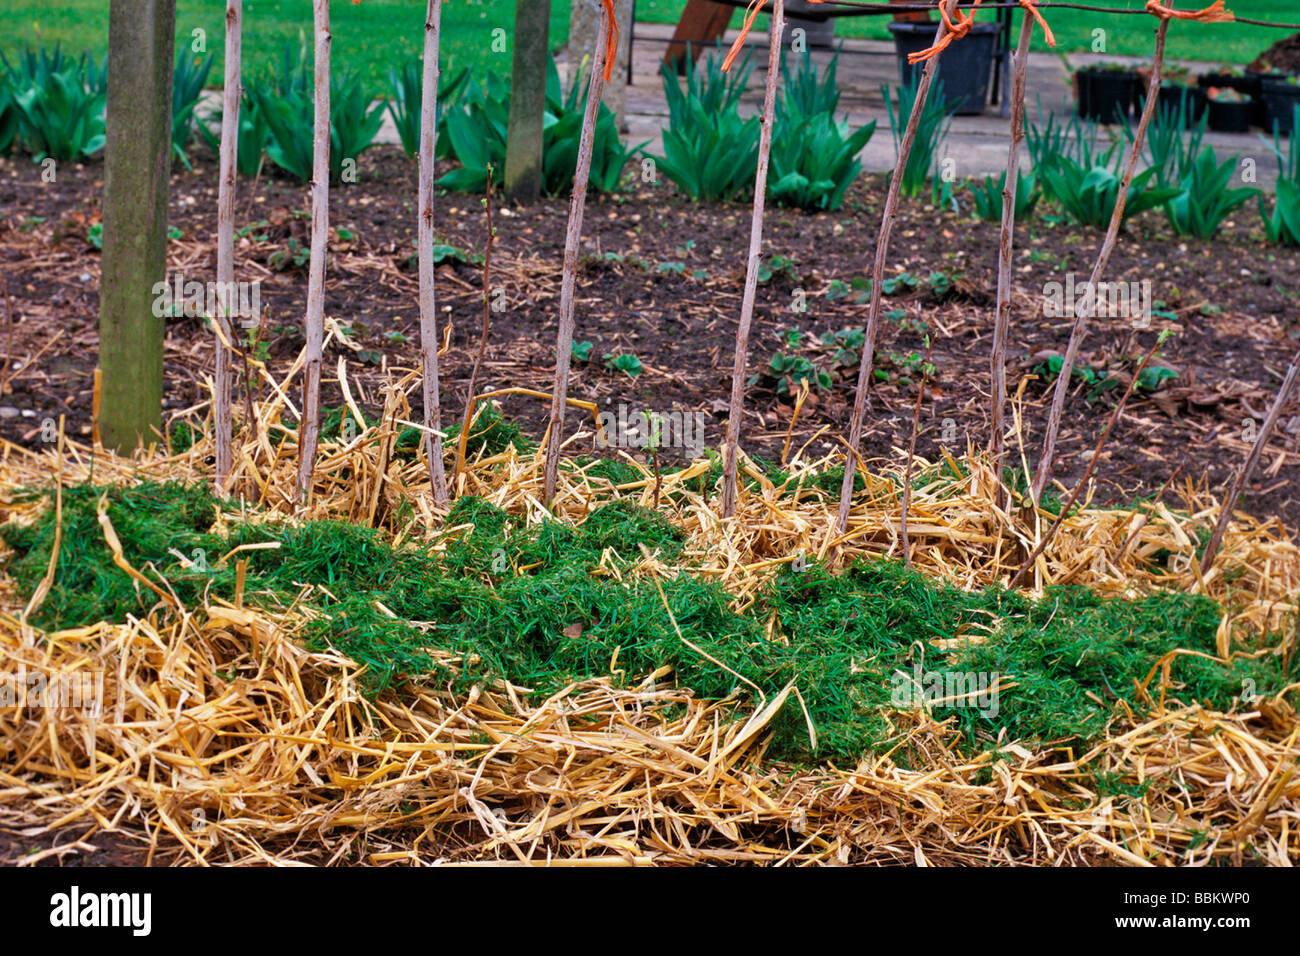 LAWN CLIPPINGS CAN BE MIXED WITH STRAW FOR MULCHNG RASPBERRIES Stock Photo